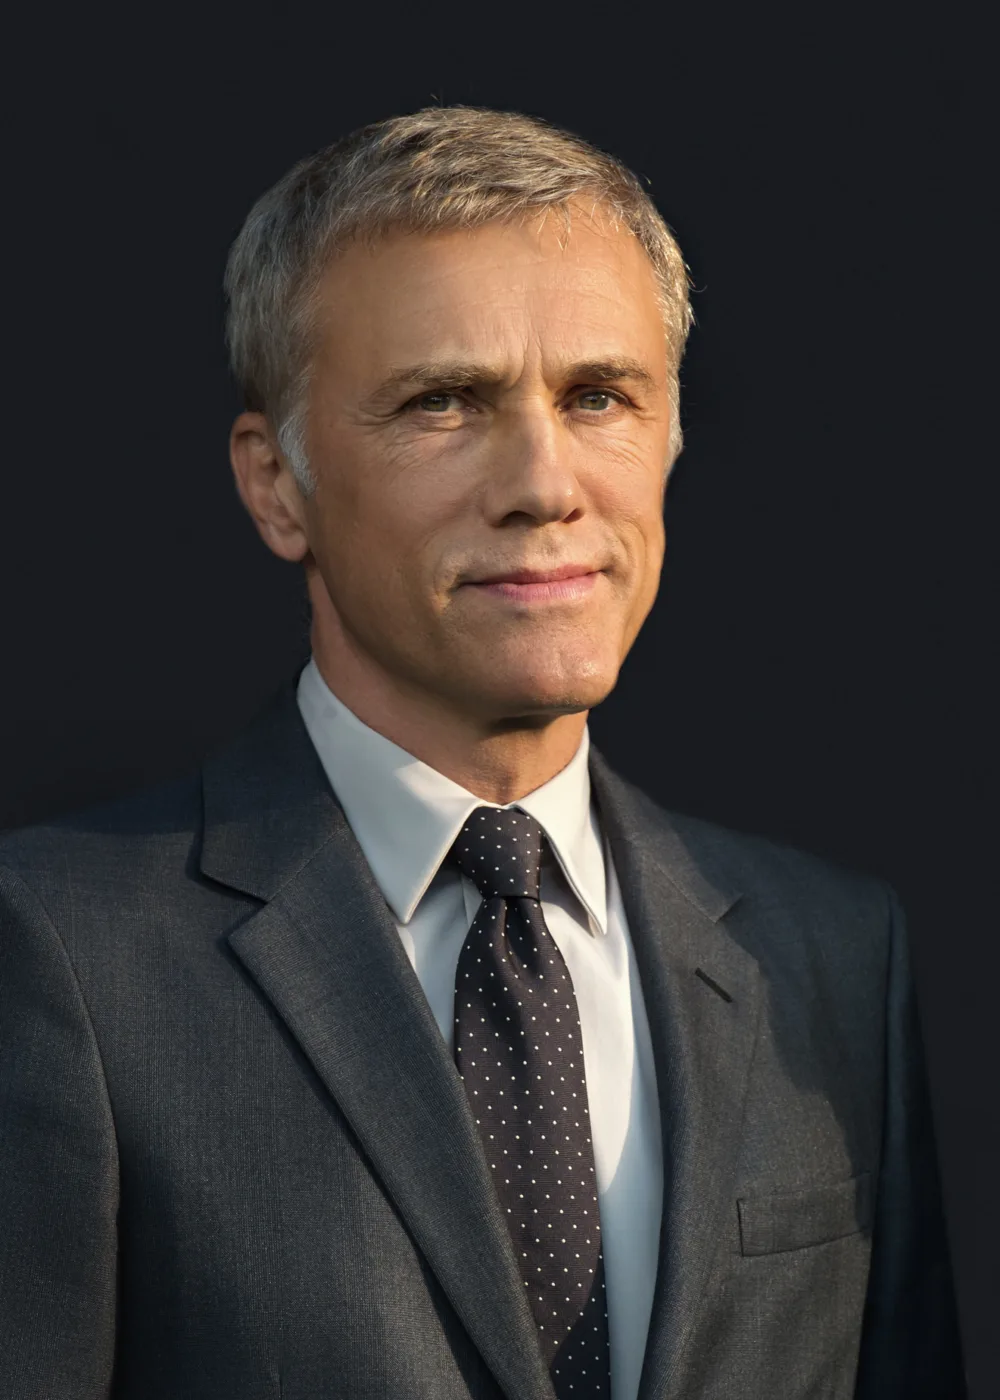 Christoph Waltz is an Austrian-German actor known for his exceptional talent and versatility on screen. Born on October 4, 1956, in Vienna, Austria, Waltz began his acting career in the late 1970s and quickly gained recognition for his work in German and Austrian film and television. He achieved international fame with his breakthrough role in Quentin Tarantino's Inglourious Basterds, for which he won the Academy Award for Best Supporting Actor. Waltz is known for his ability to convey complex emotions and inhabit a wide range of characters, from charming to menacing to comedic. He has received numerous awards and nominations for his work, including two Academy Awards, two Golden Globe Awards, and two BAFTA Awards. In addition to his acting career, Waltz is also a director and has worked in theater and opera. With his impressive talent and breadth of experience, Waltz has become one of the most respected and sought-after actors of his generation. He continues to captivate audiences with his dynamic performances on screen and stage.